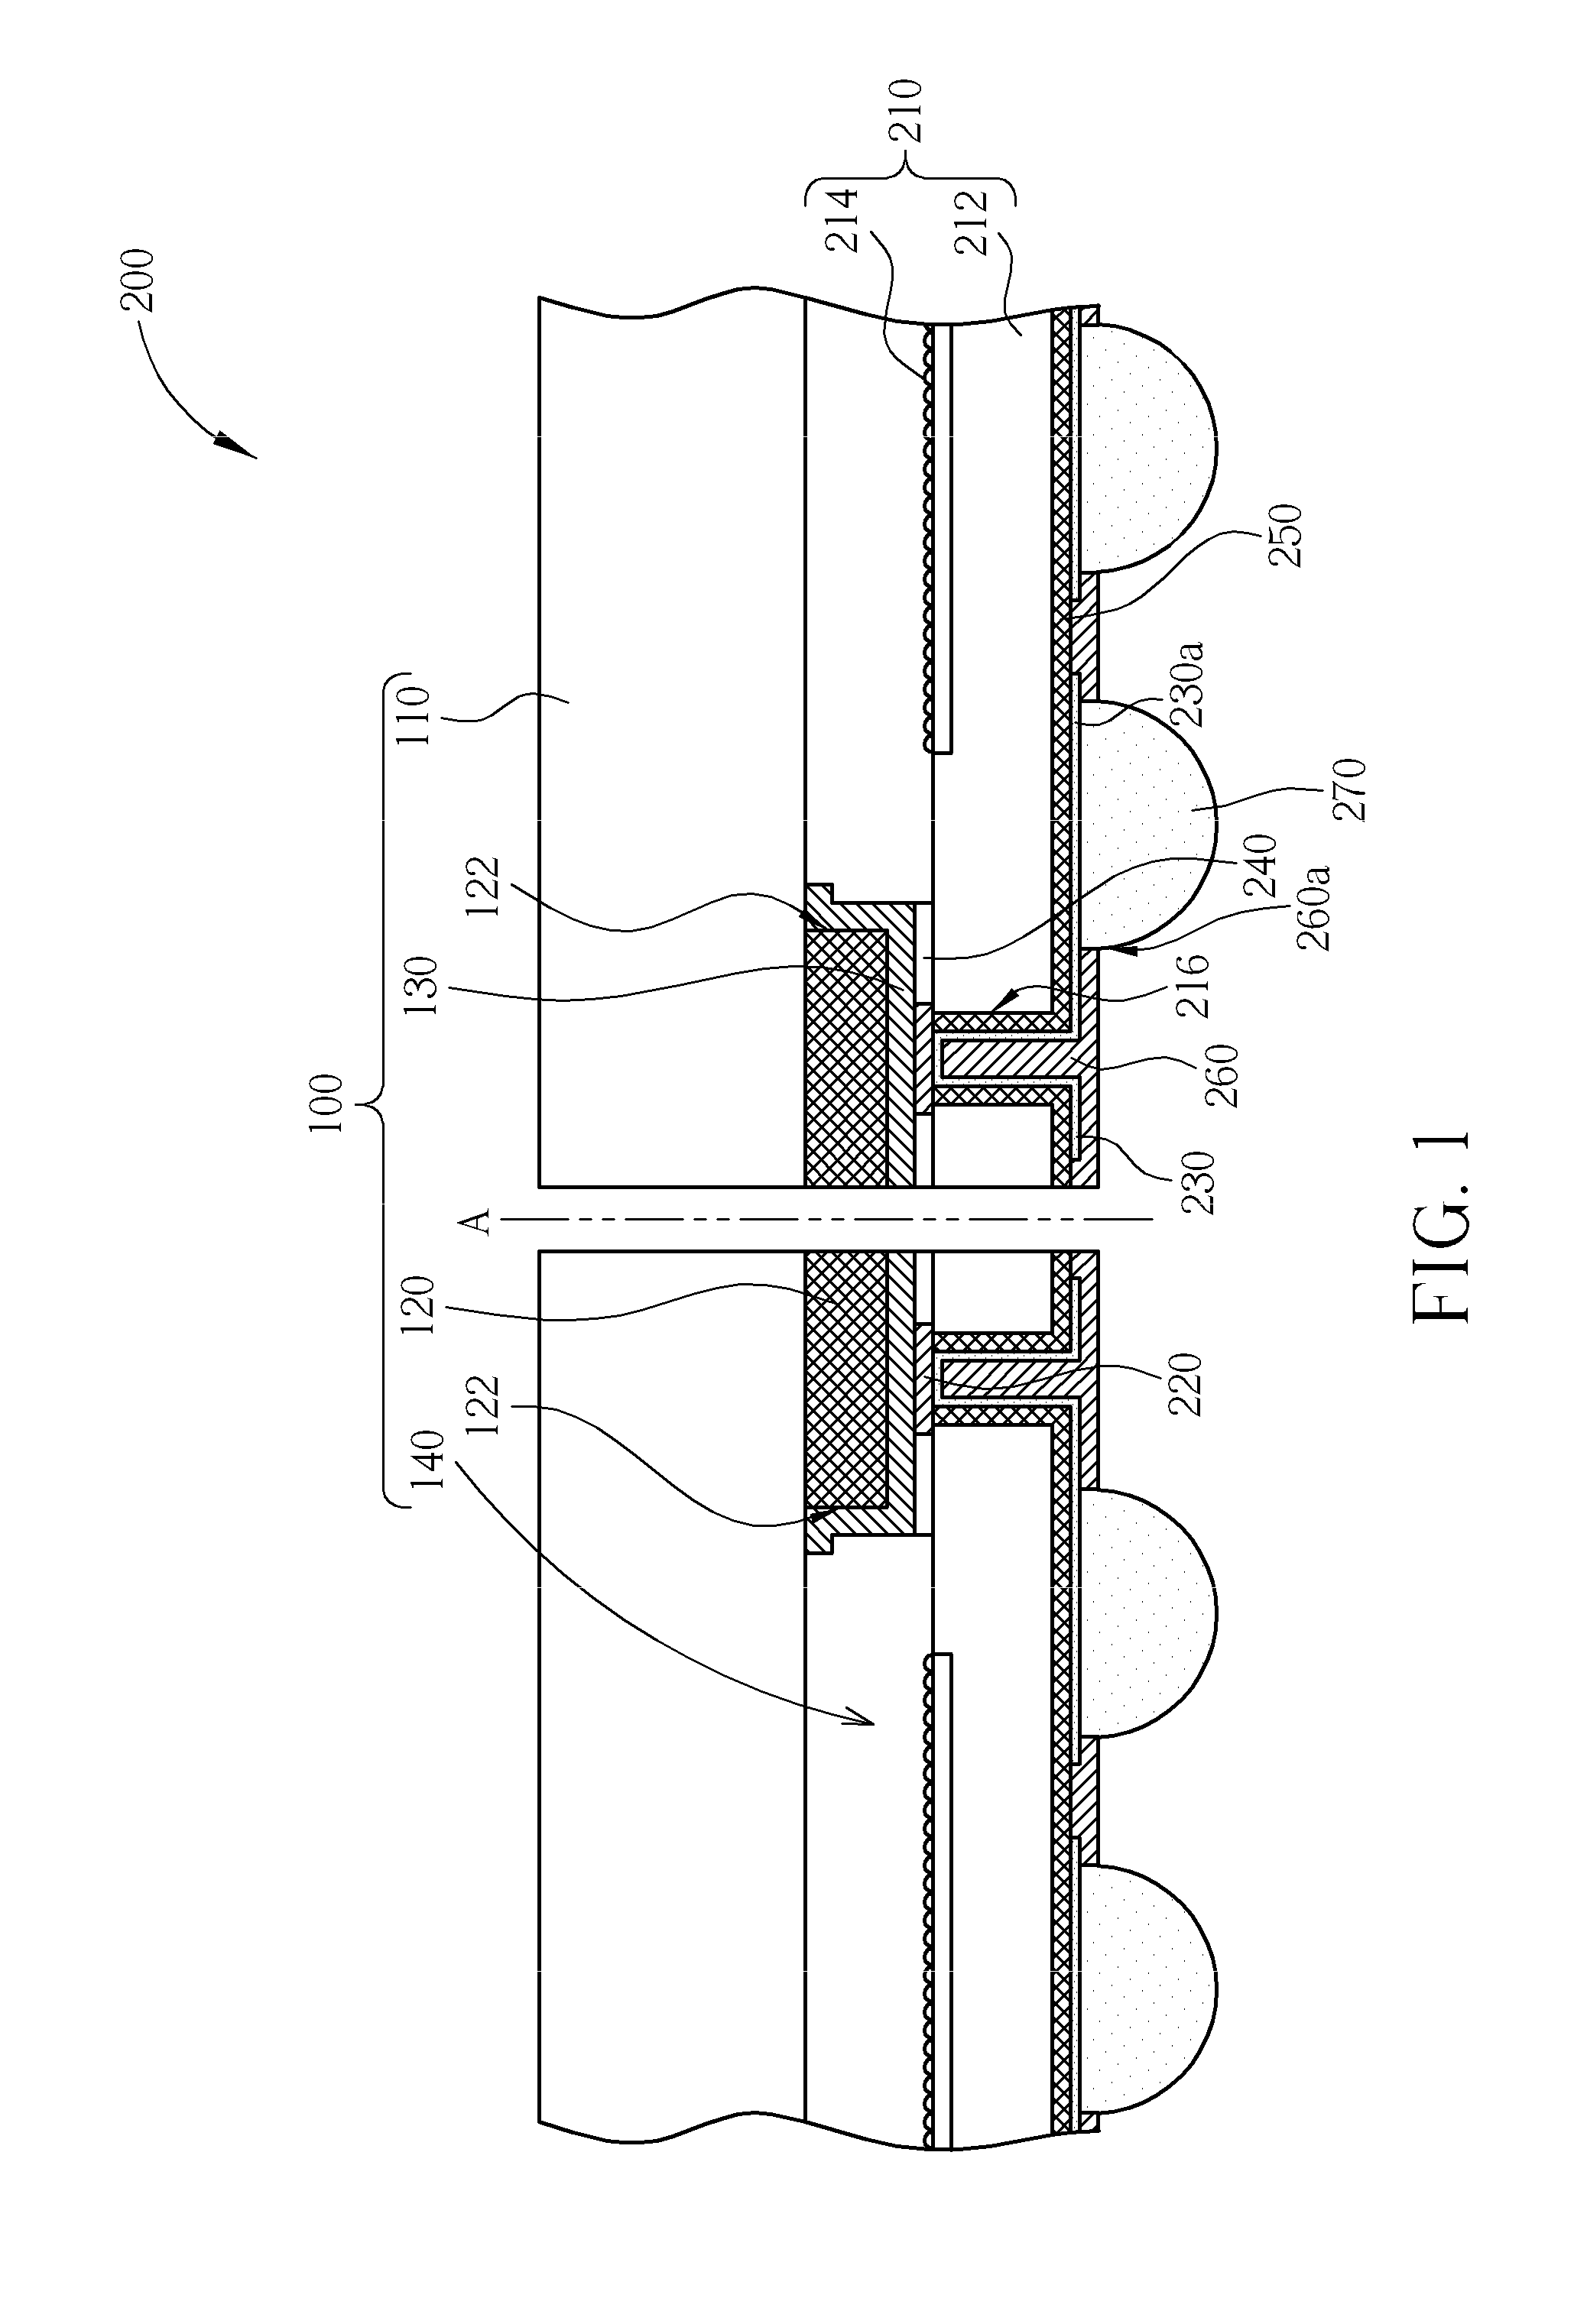 Optical cover plate with improved solder mask dam on galss for image sensor package and fabrication method thereof